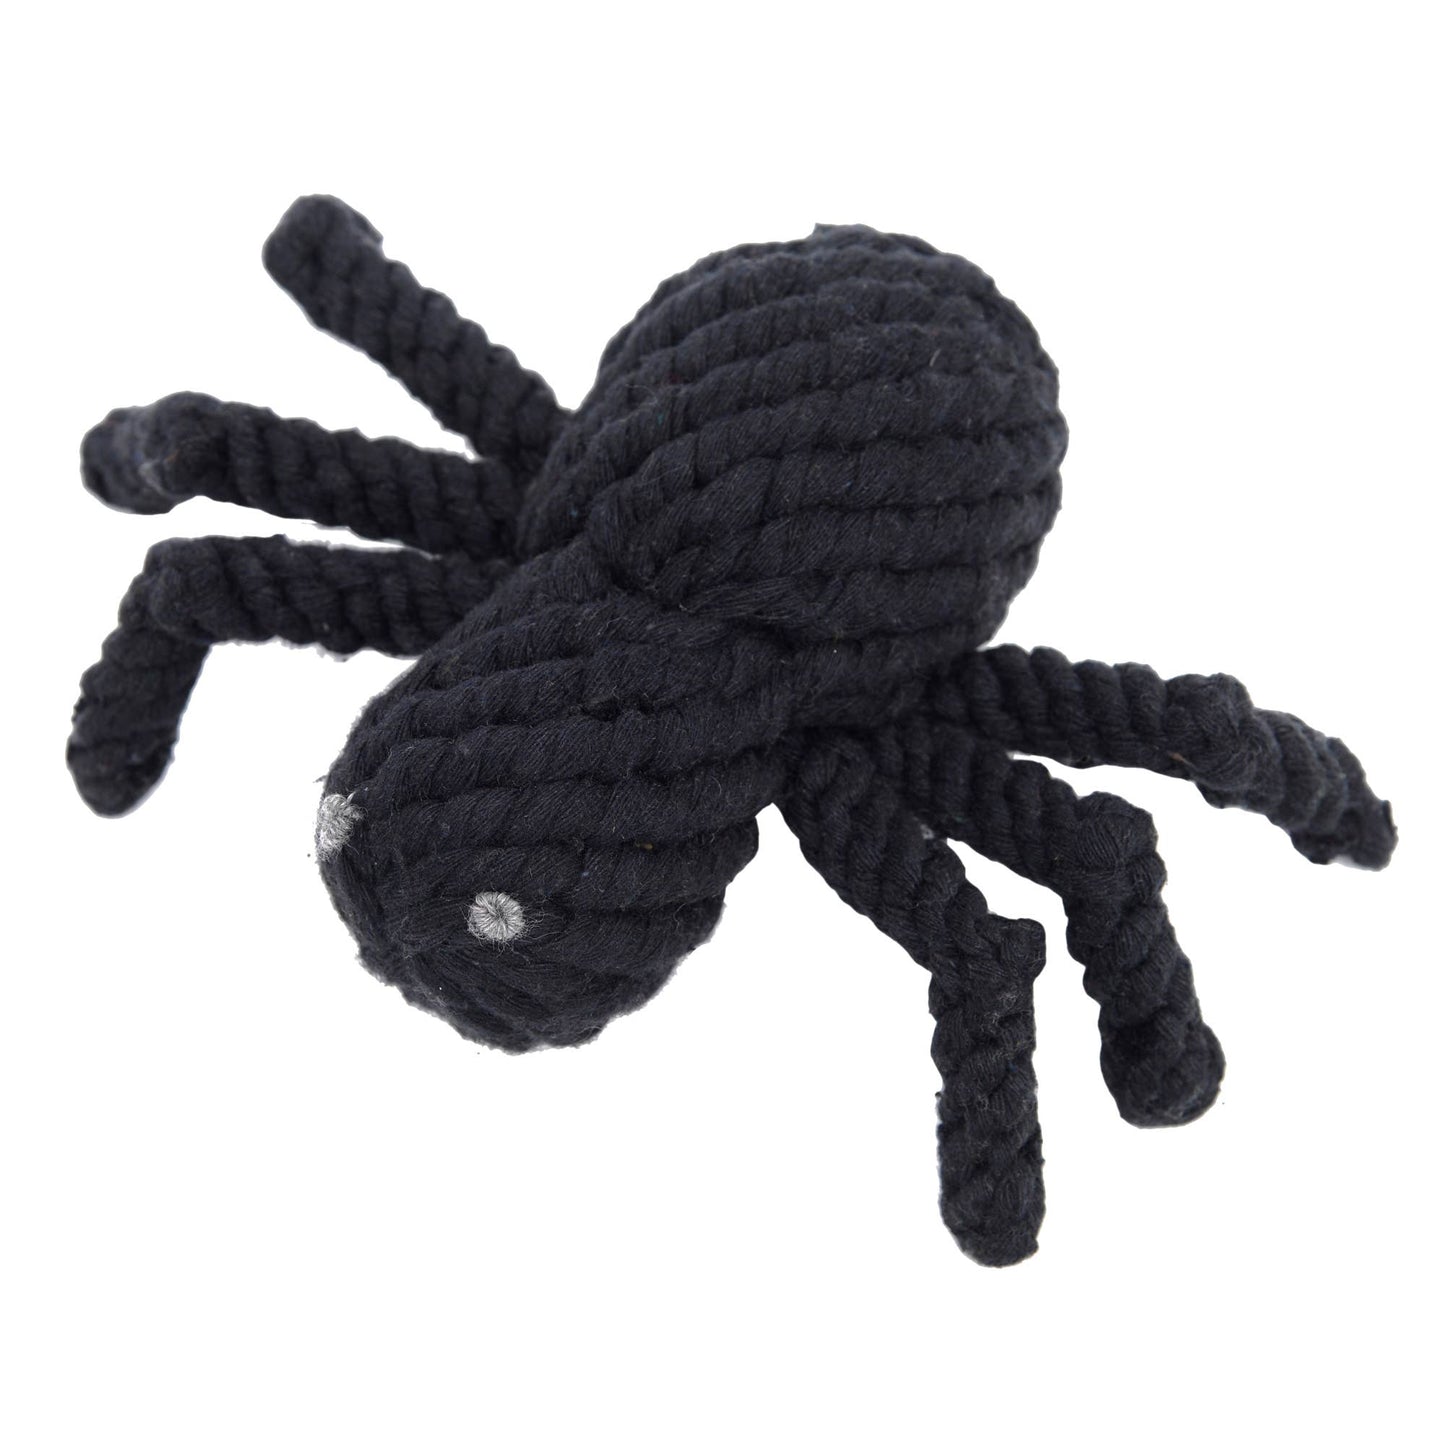 Spider Rope Toy 5" (One Size)